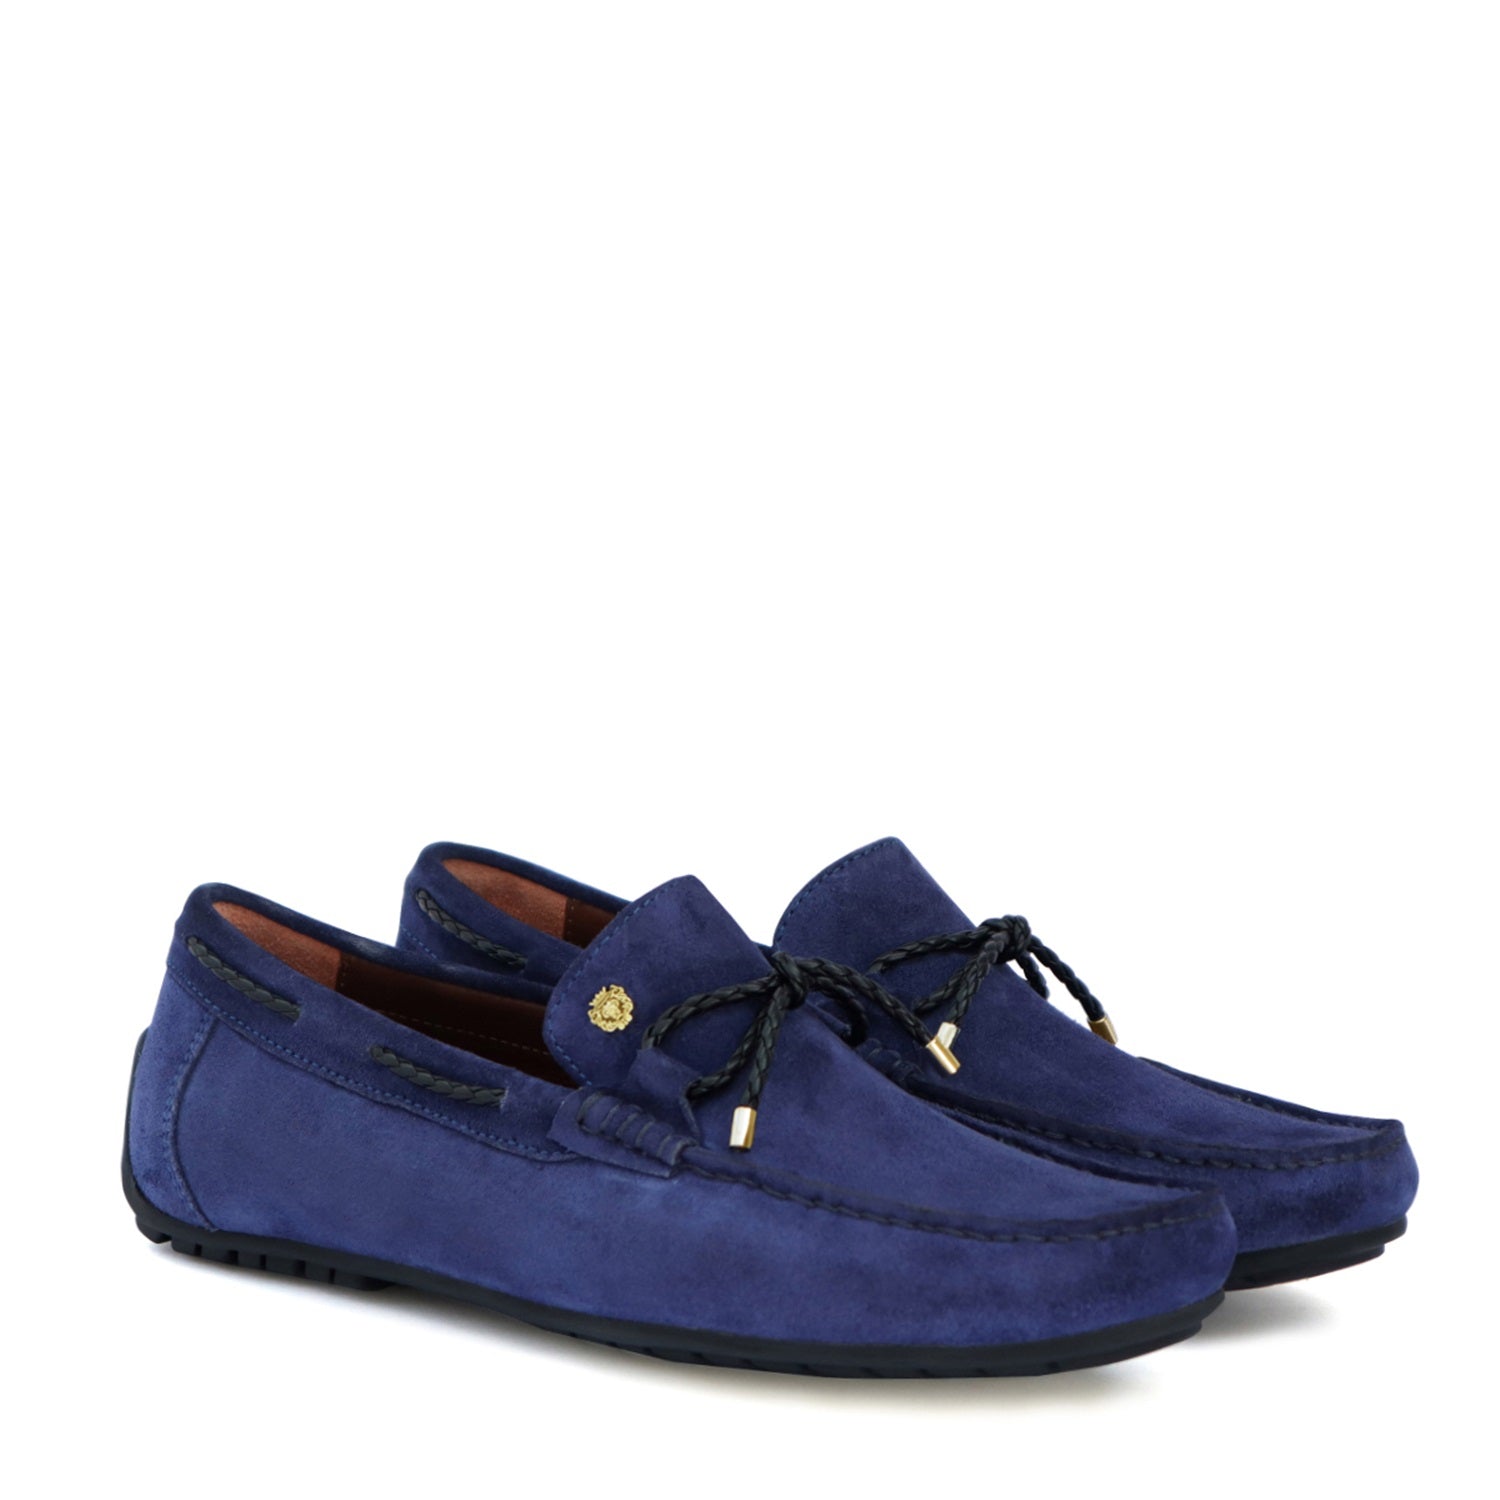 Mini Lion Weaved Tassel Bow Loafers in Blue Suede Leather